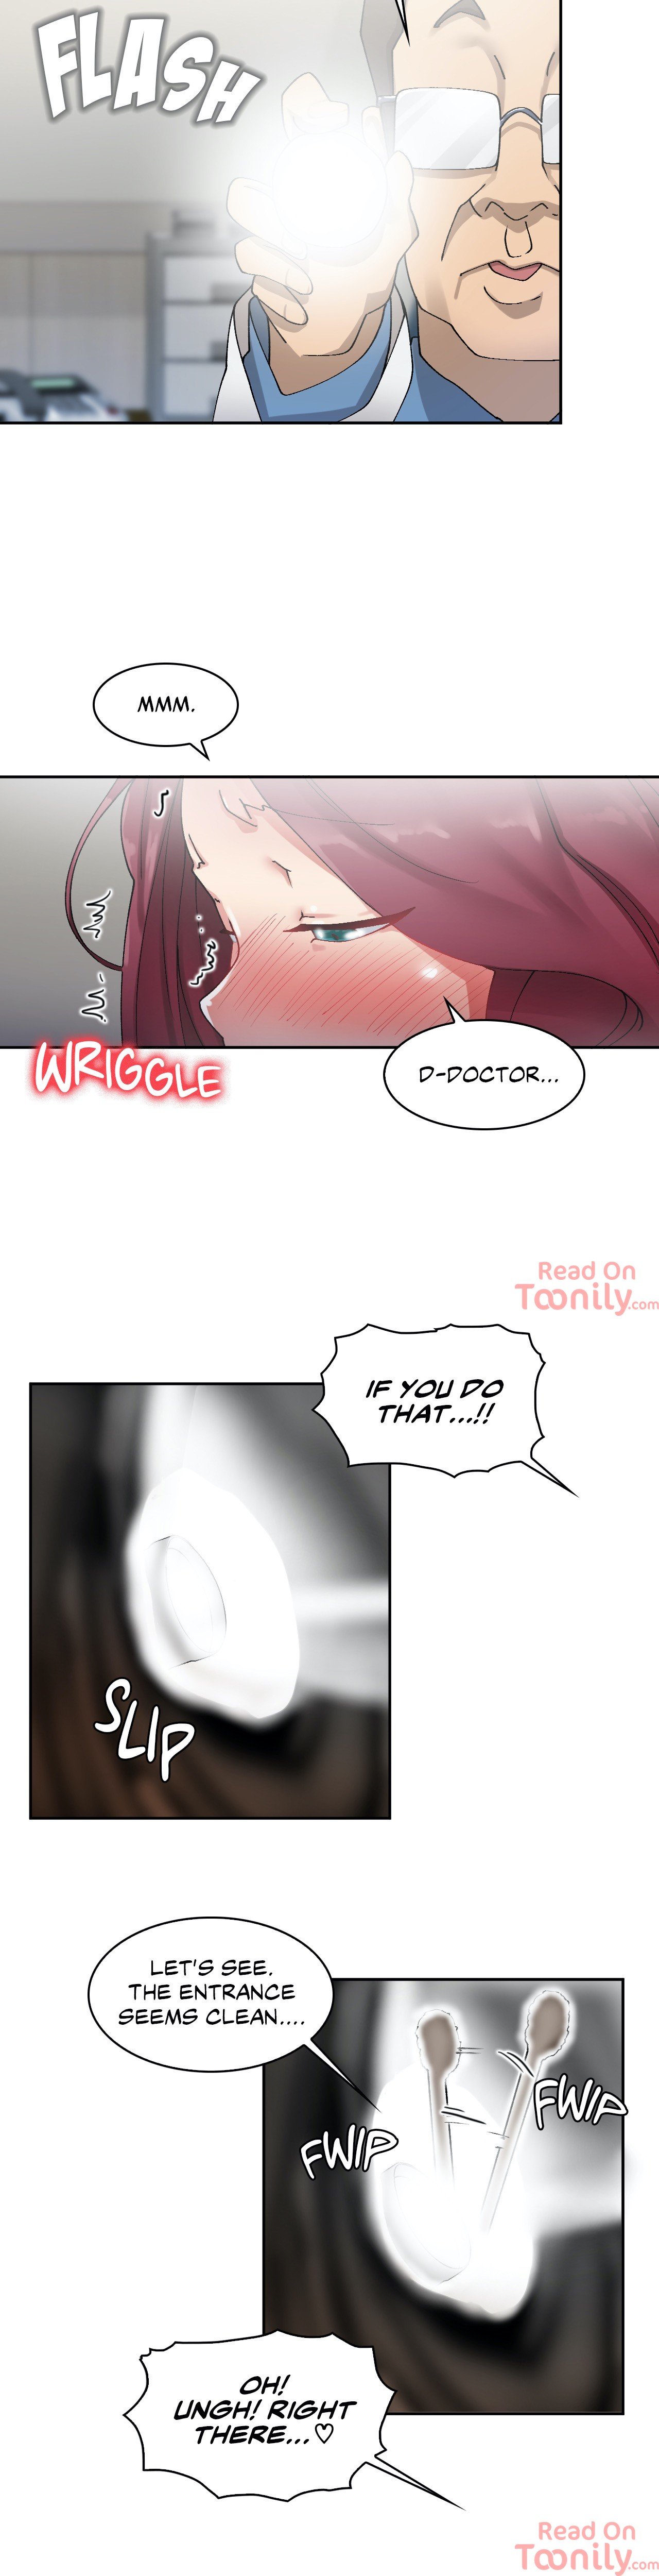 The Girl Hiding in the Wall - Chapter 4 Page 14